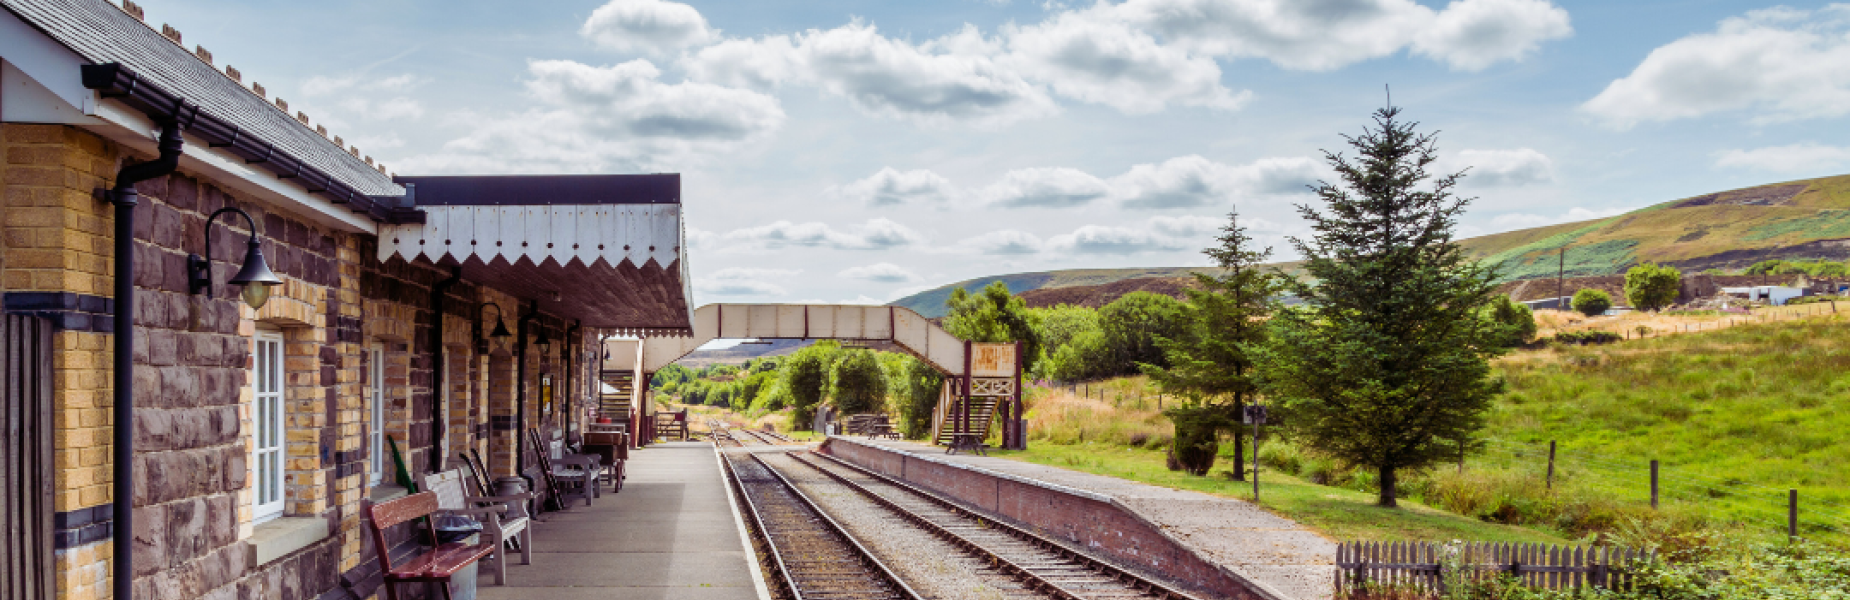 a picture of Torfaen heritage railway